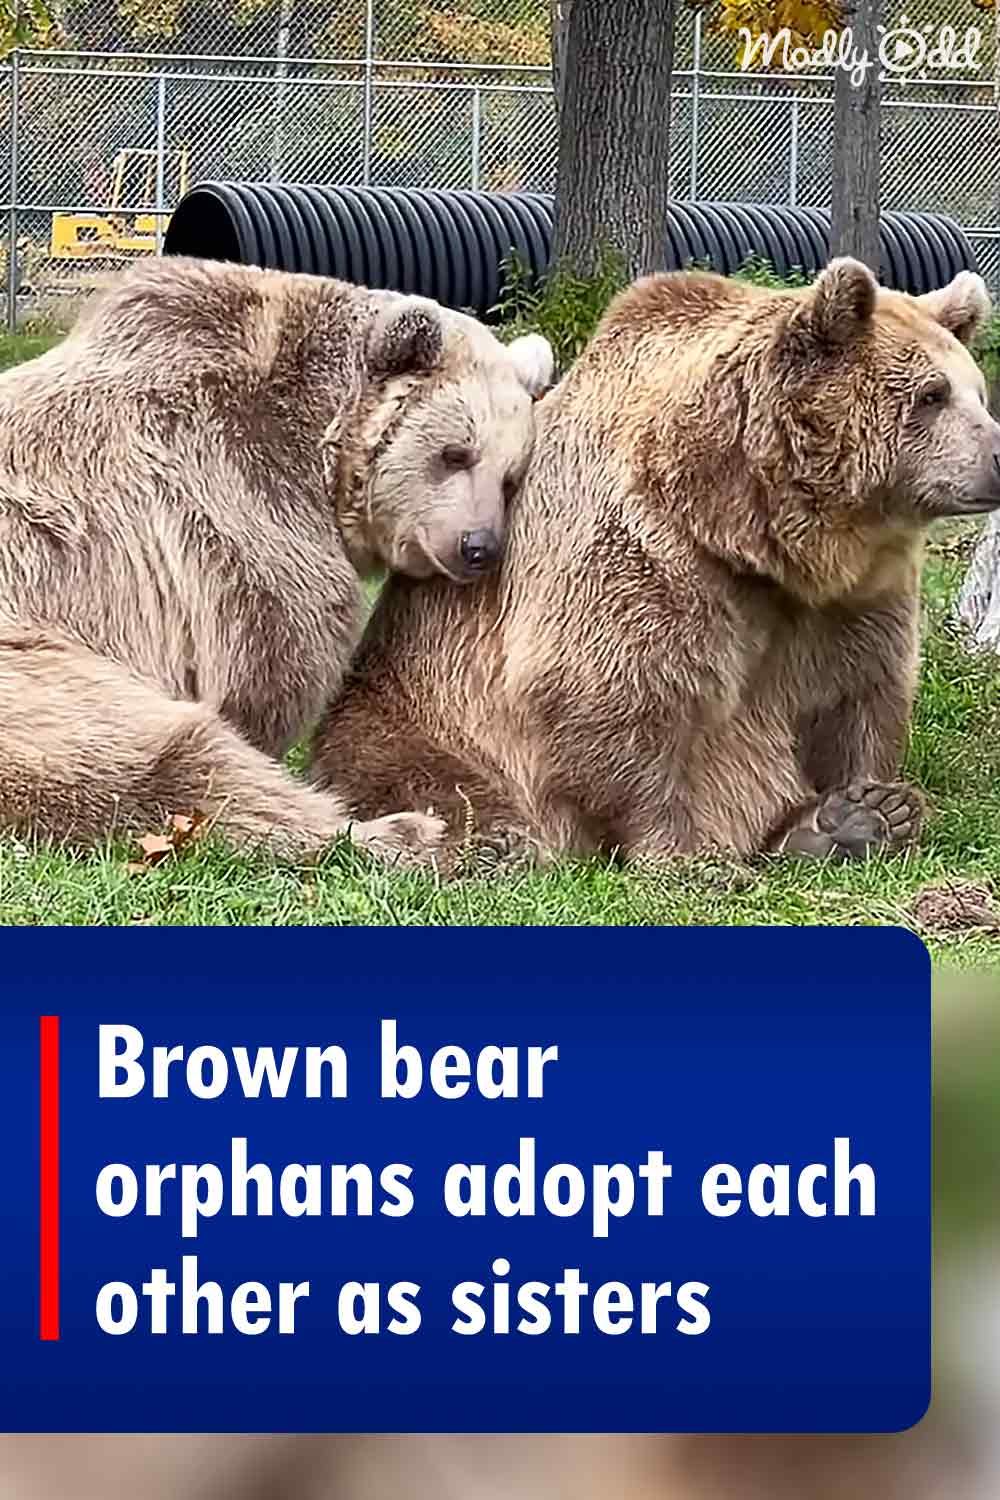 Brown bear orphans adopt each other as sisters